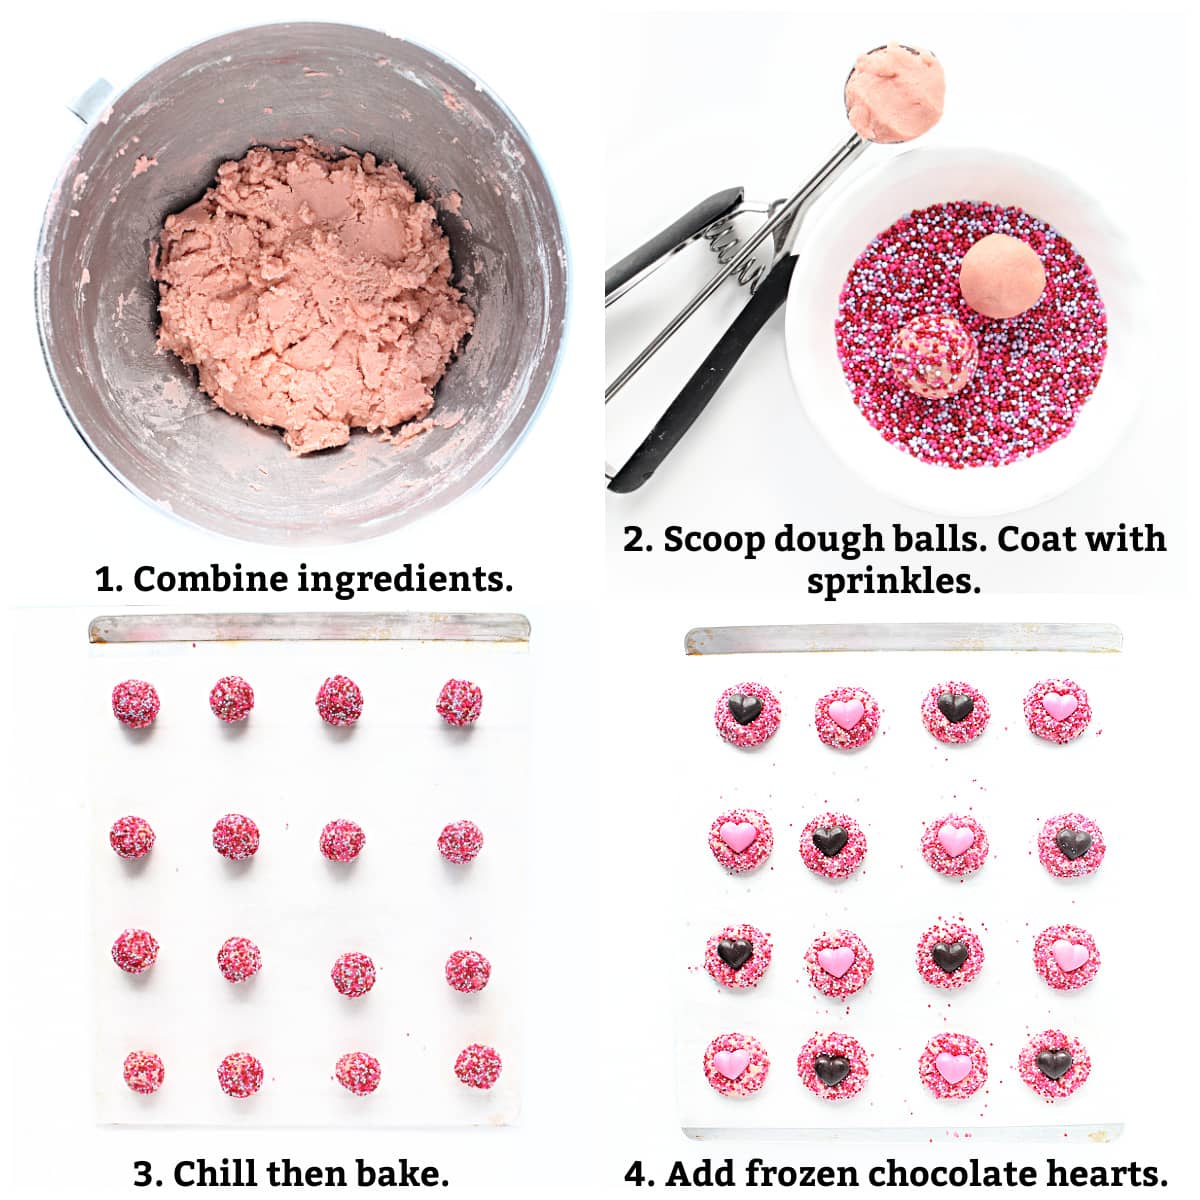 Instructions: combine ingredients, scoop dough and roll in sprinkles, bake, add frozen chocolate hearts.